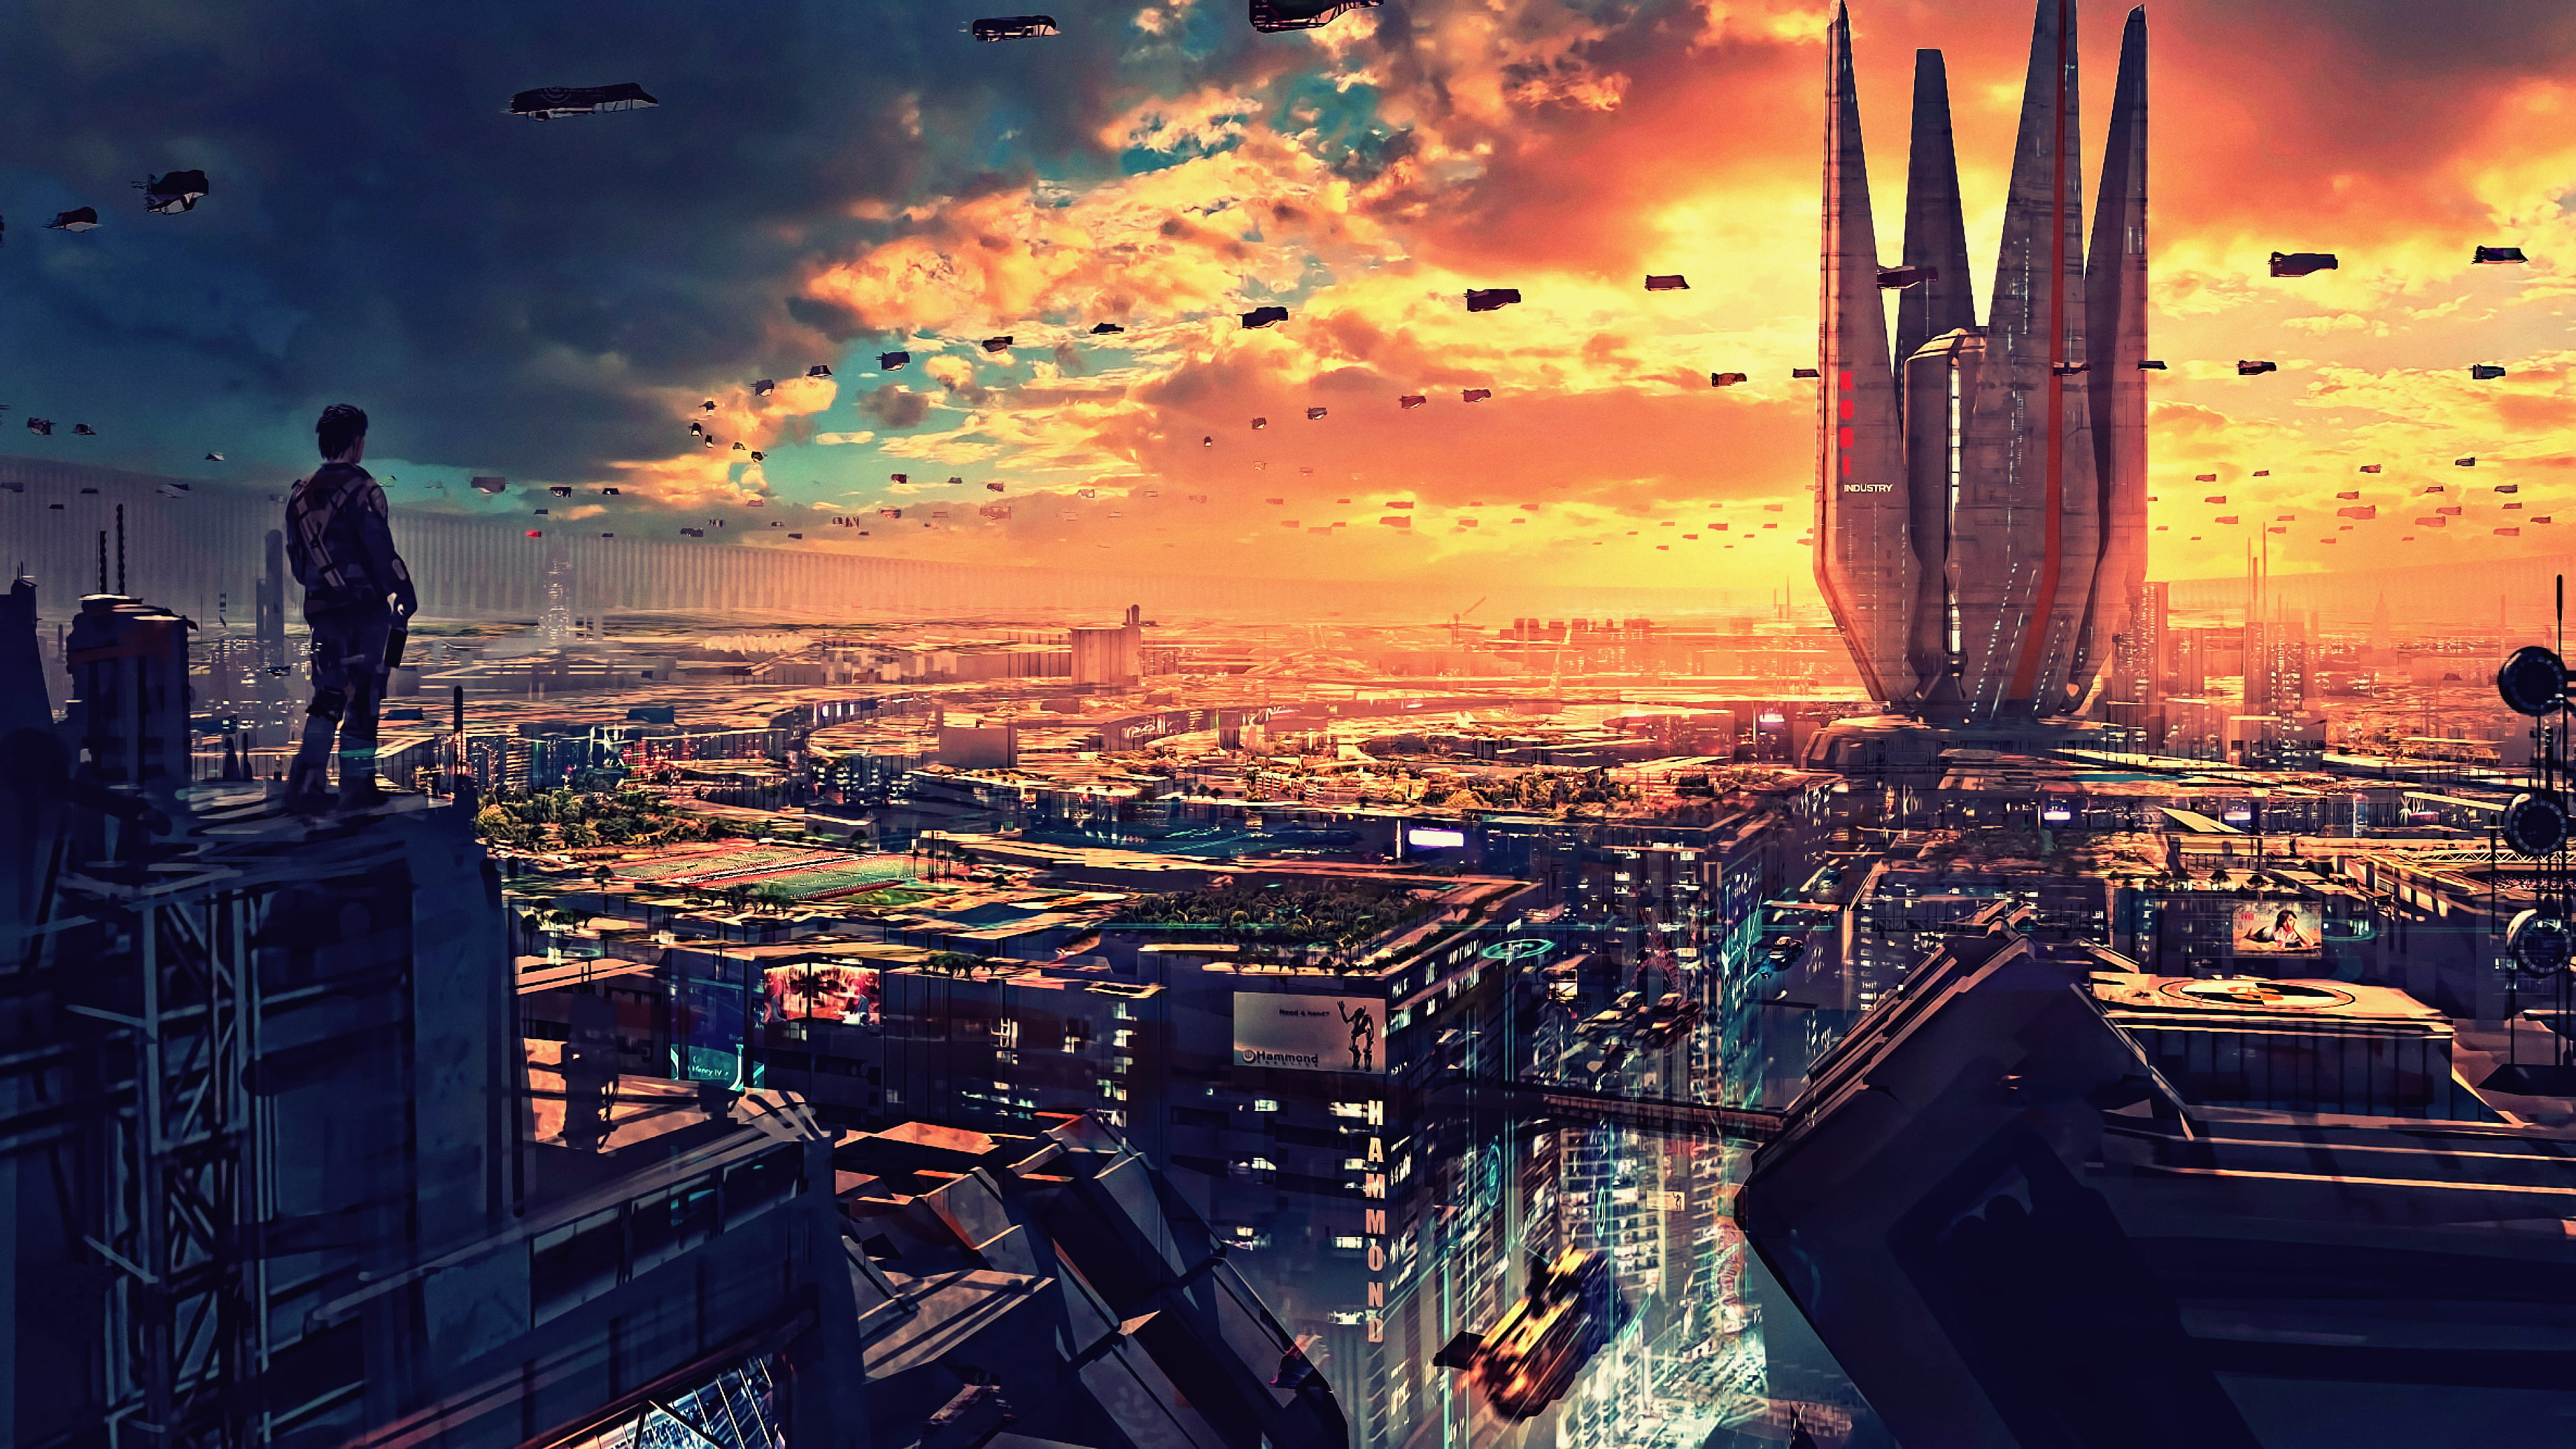 Person standing on top of building wallpaper, artwork, futuristic